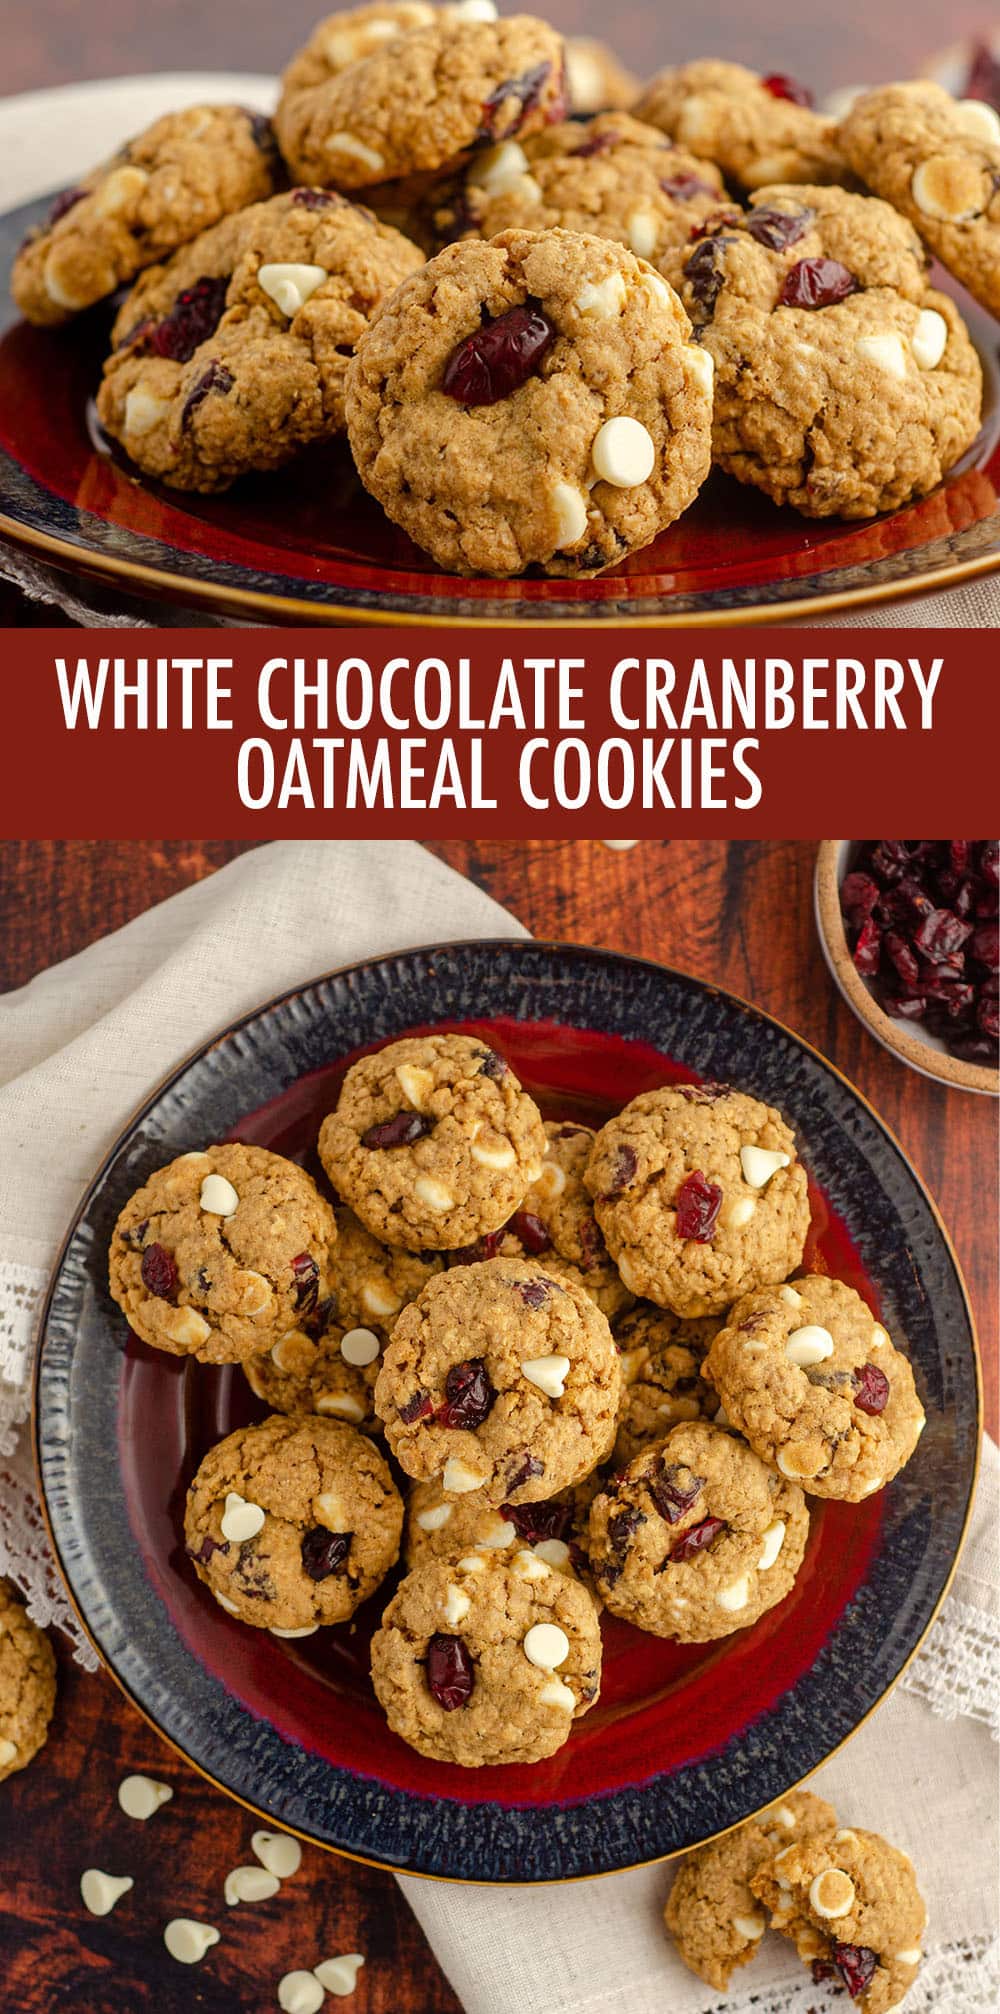 Soft and chewy oatmeal cookies fully loaded with white chocolate chips and dried cranberries. via @frshaprilflours